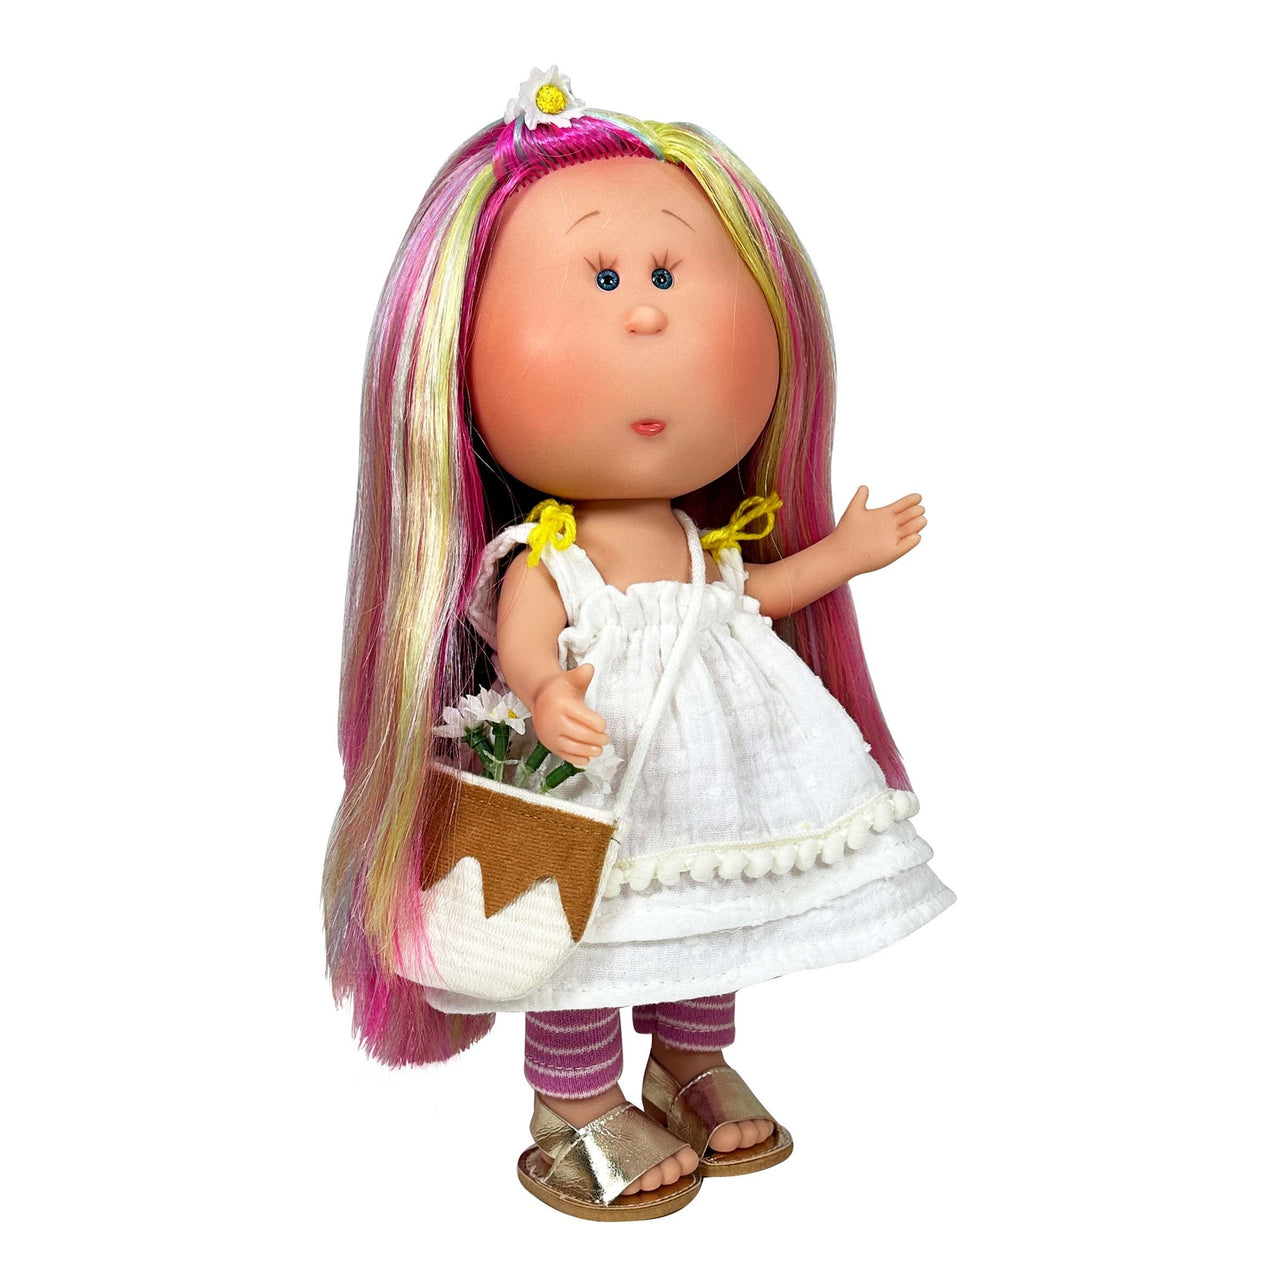 Bloom - Fully Dressed LITTLE Mia Doll with Rainbow Hair